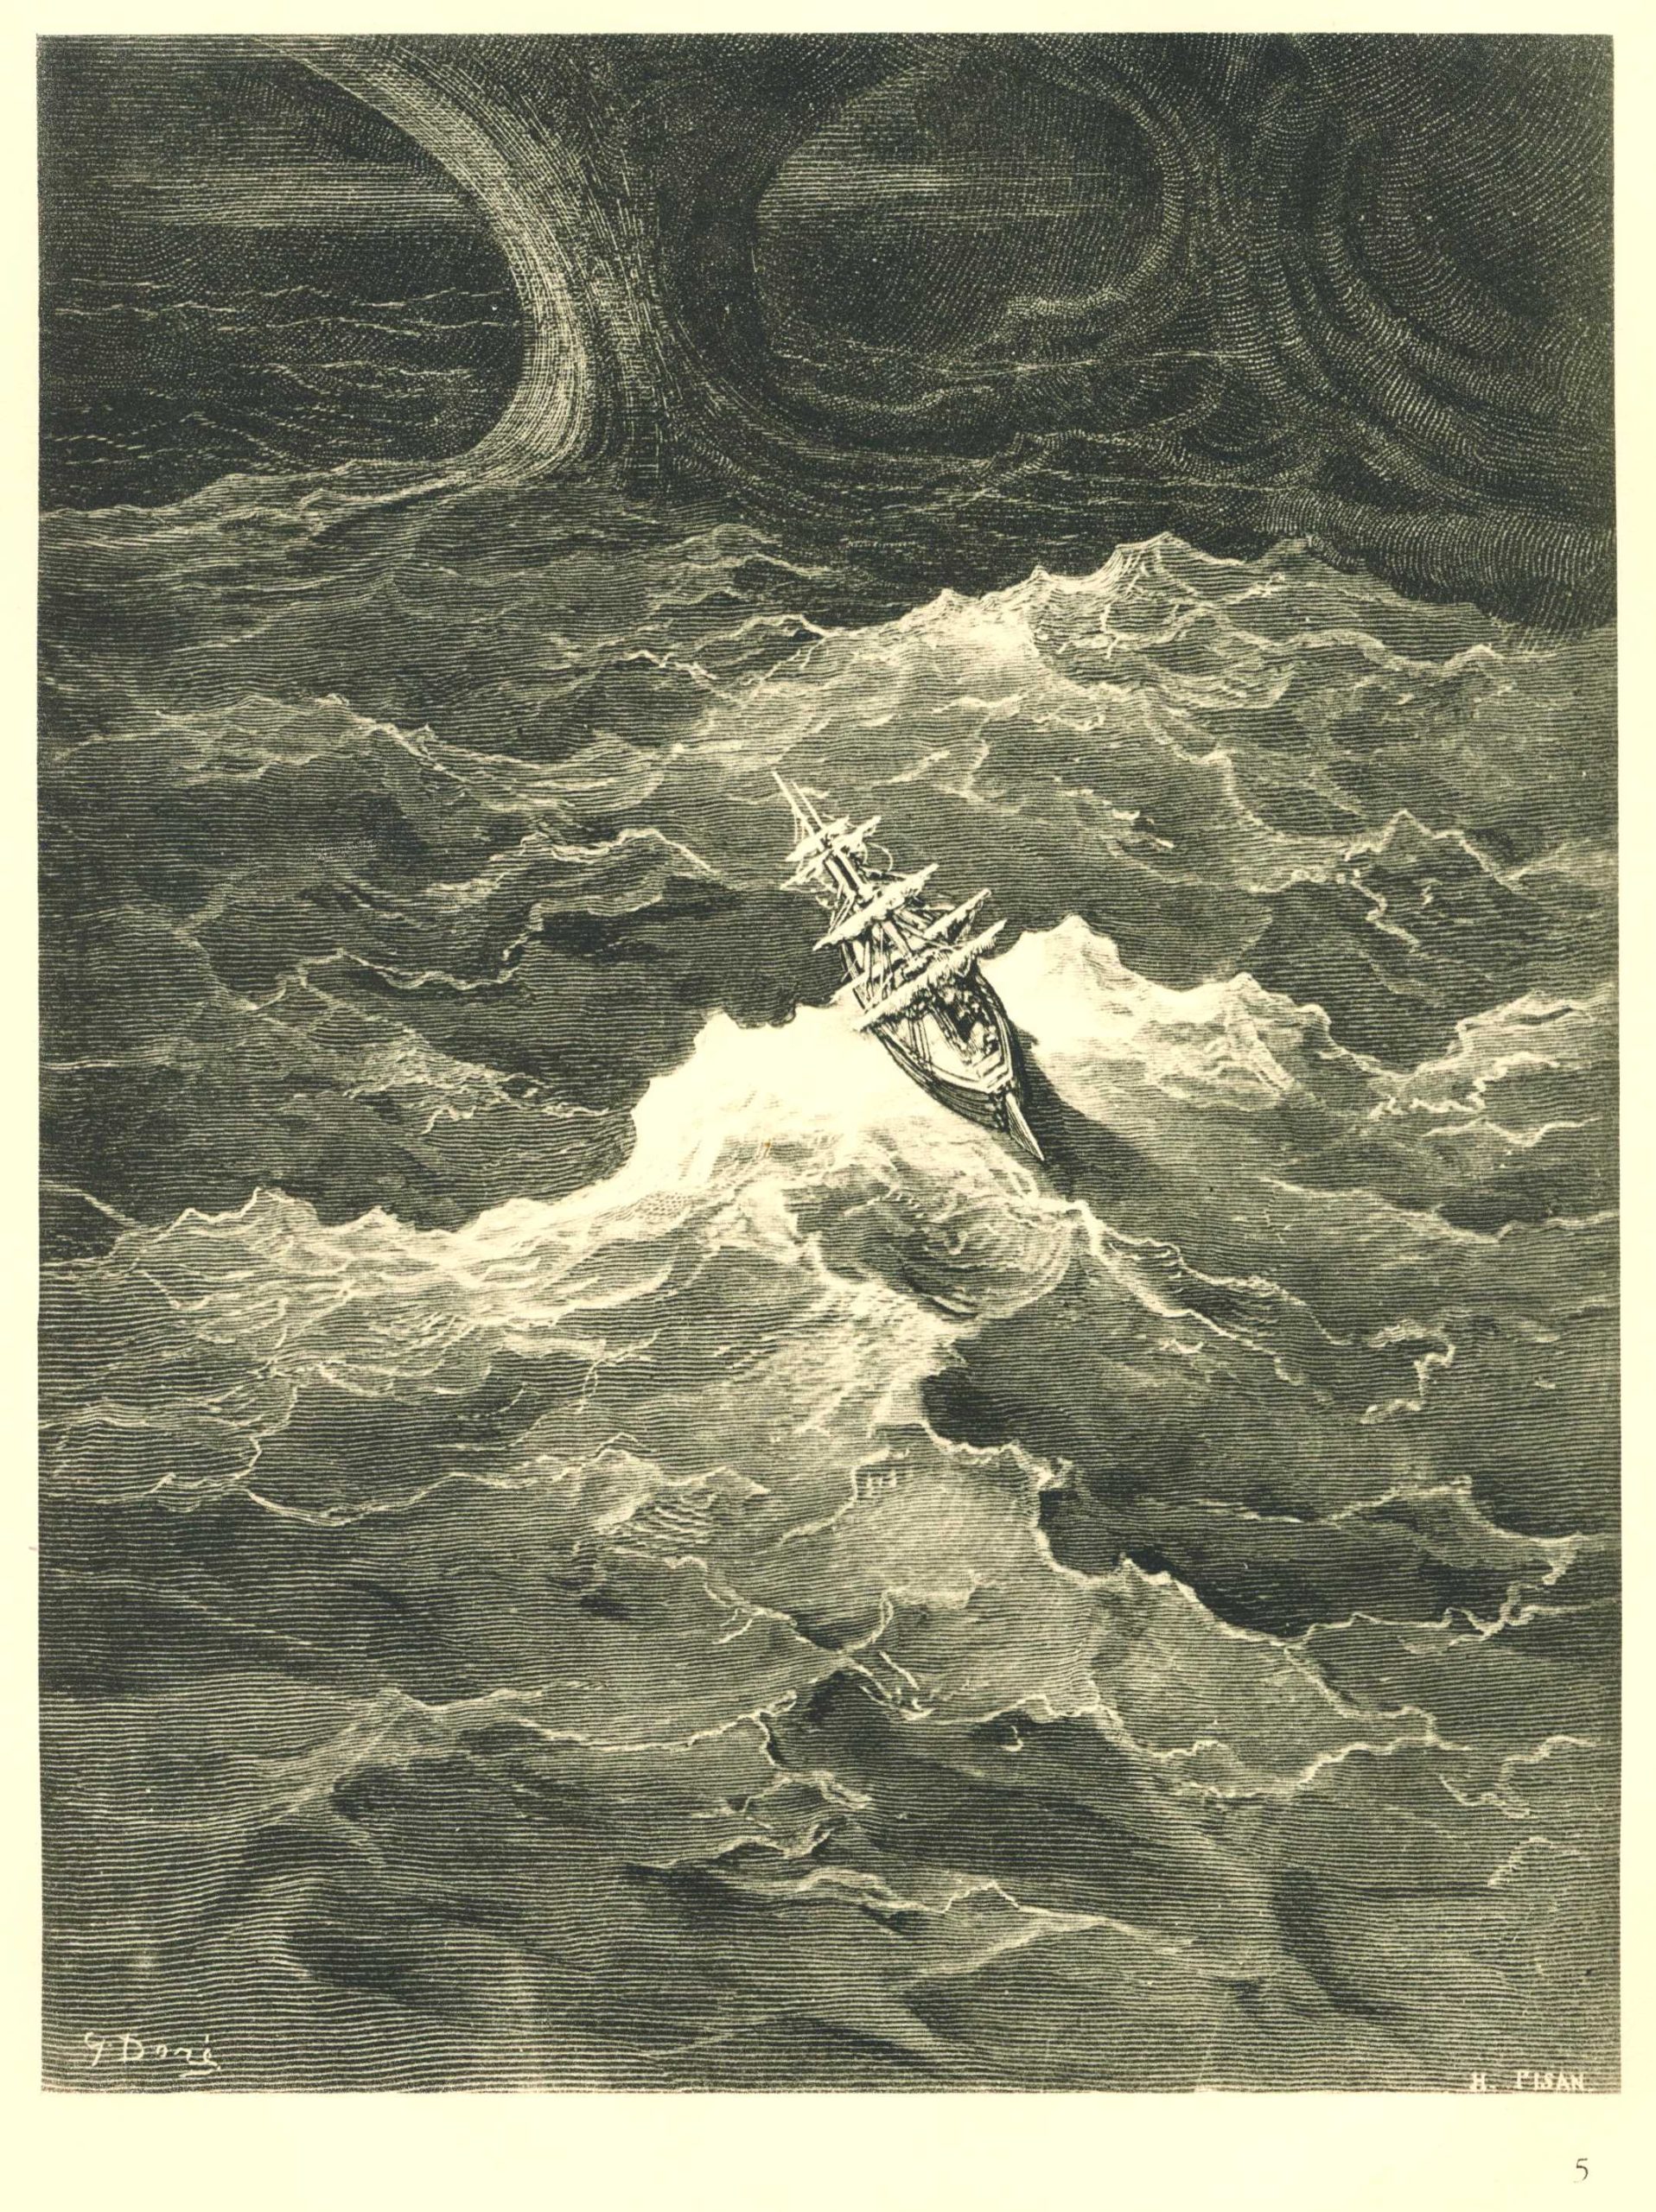 A ship swaying violently in a stormy sea